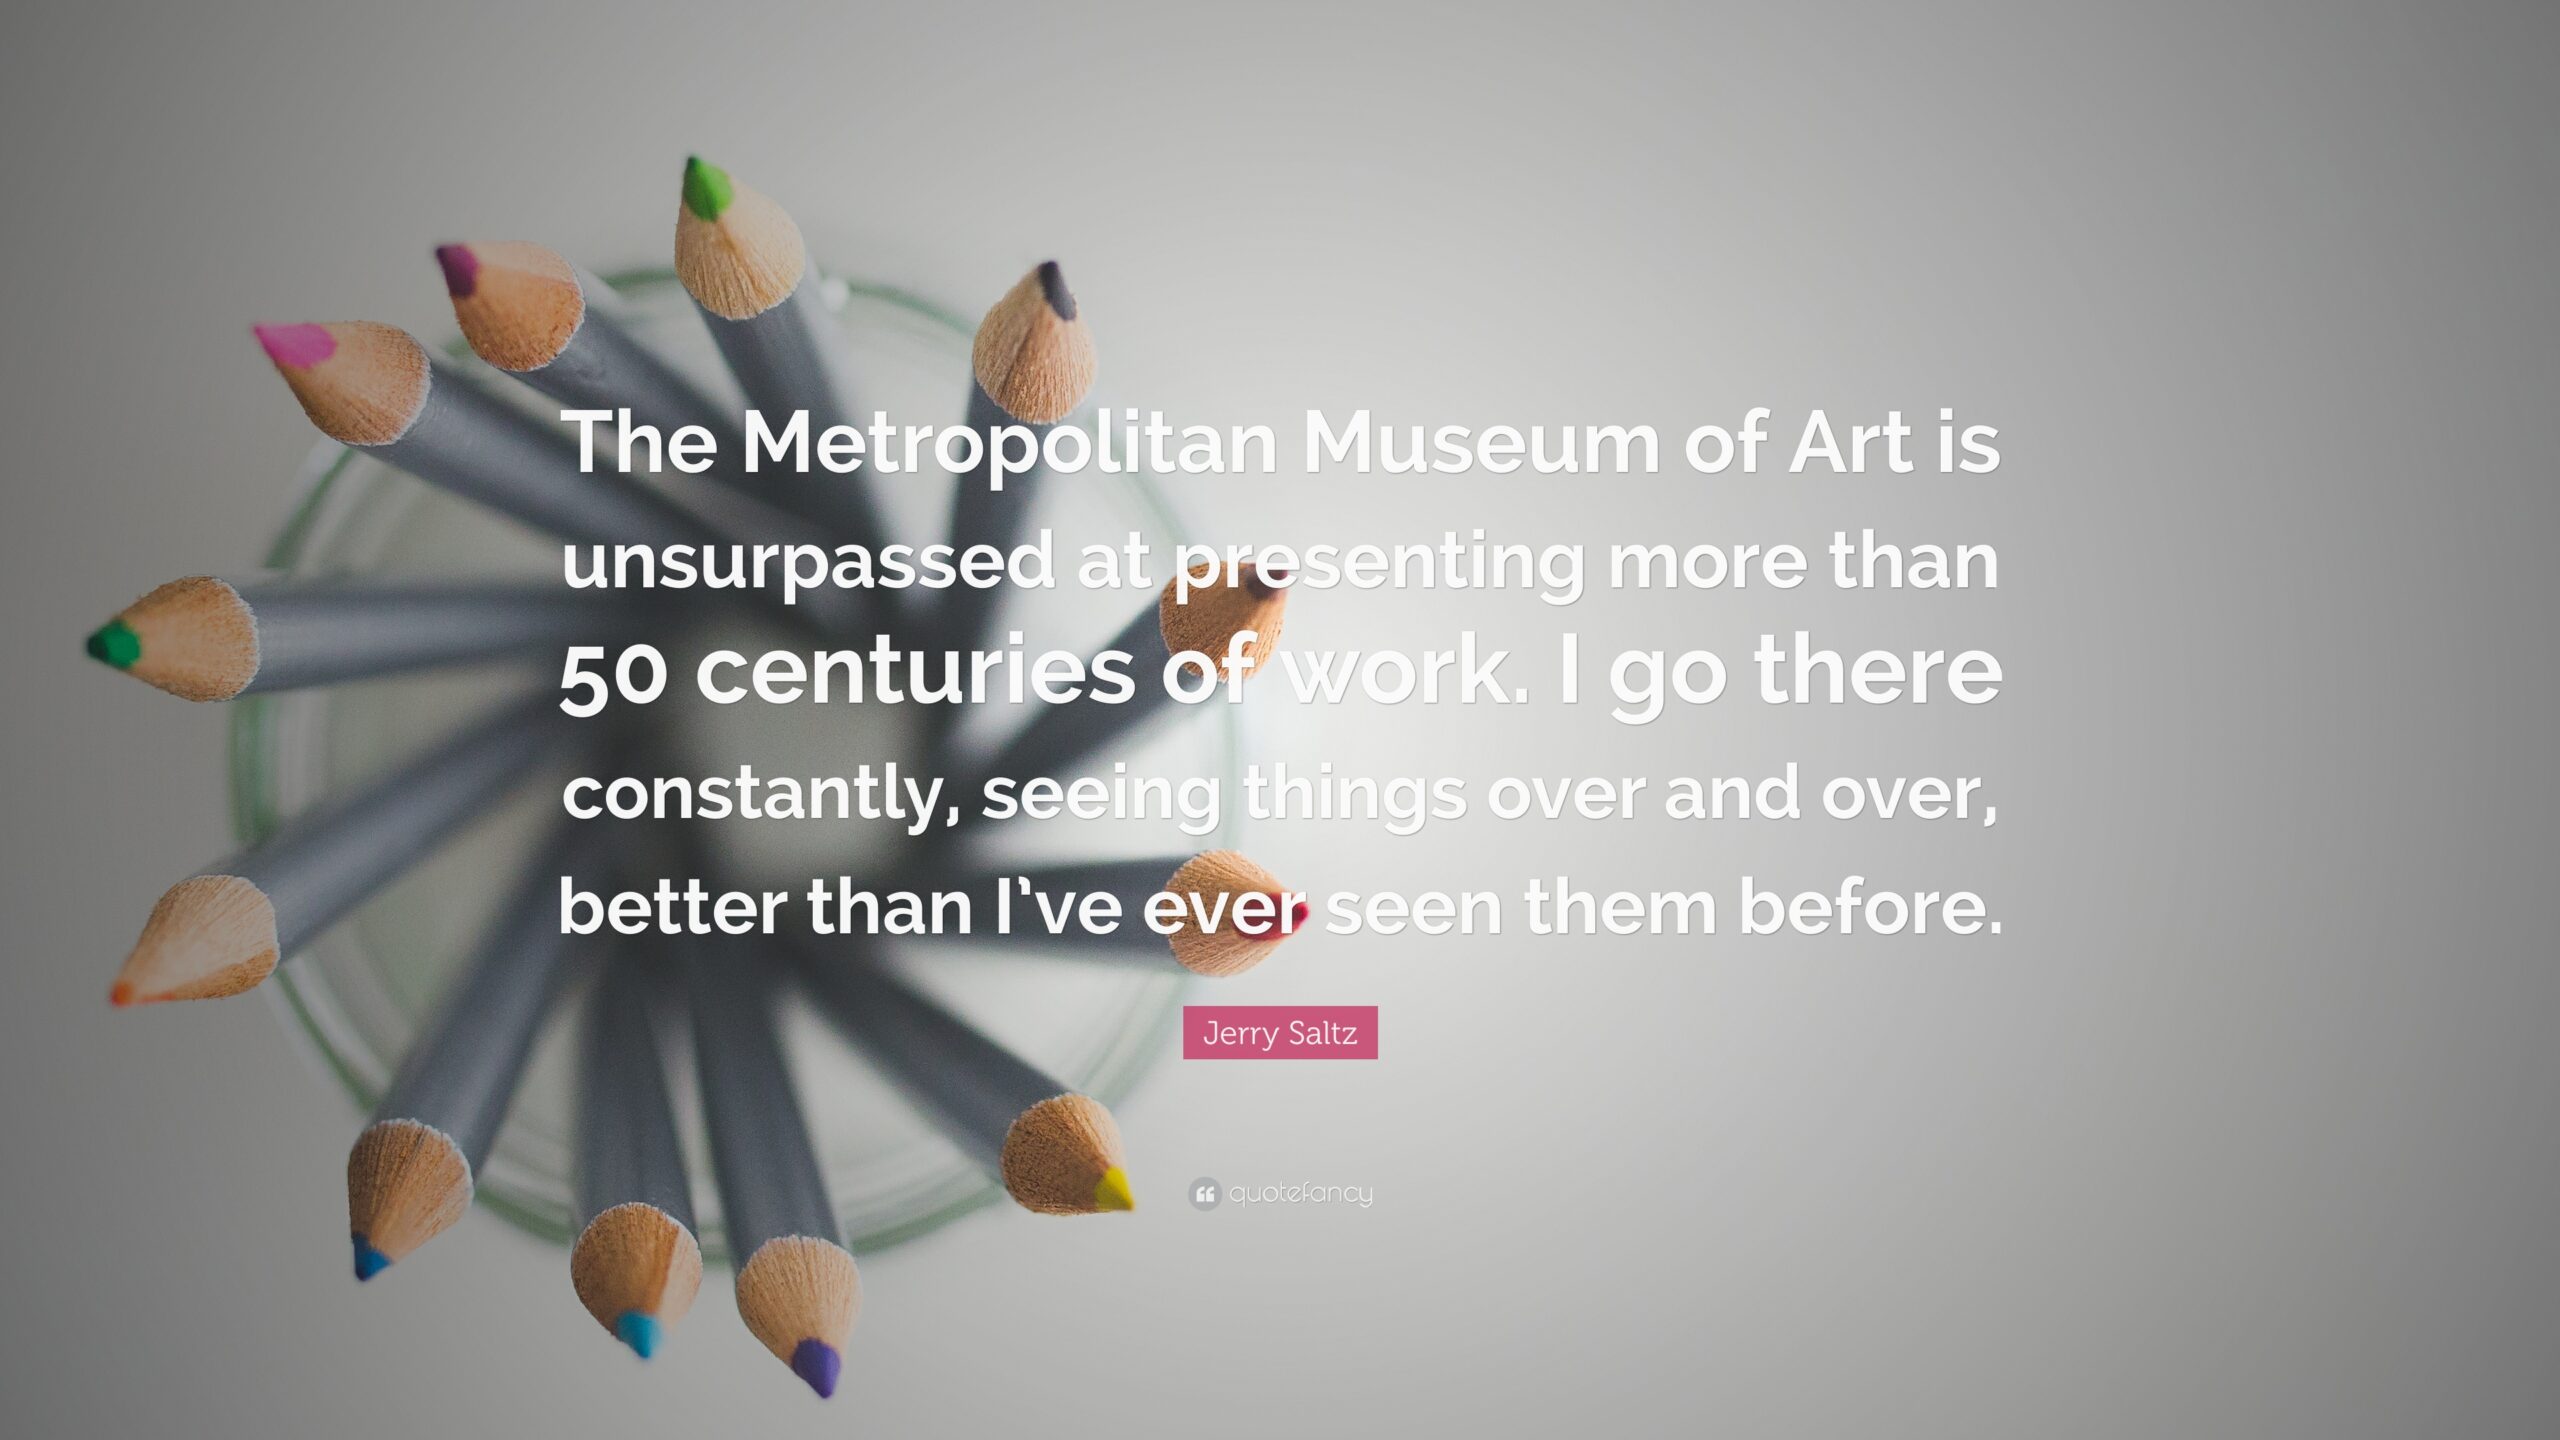 Jerry Saltz Quote “The Metropolitan Museum of Art is unsurpassed at